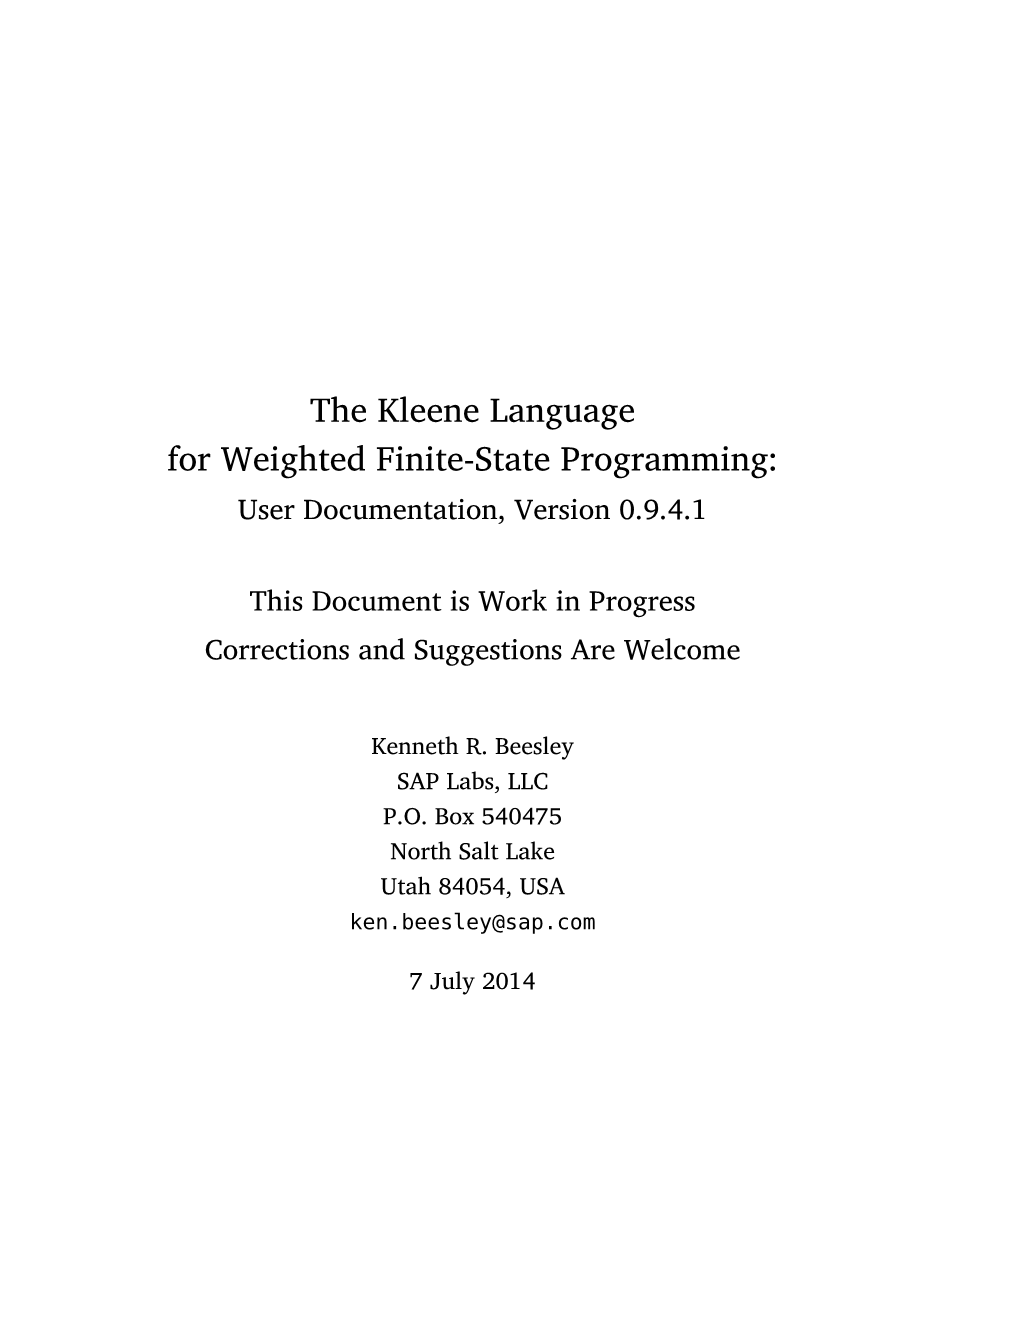 The Kleene Language for Weighted Finite-State Programming: User Documentation, Version 0.9.4.1